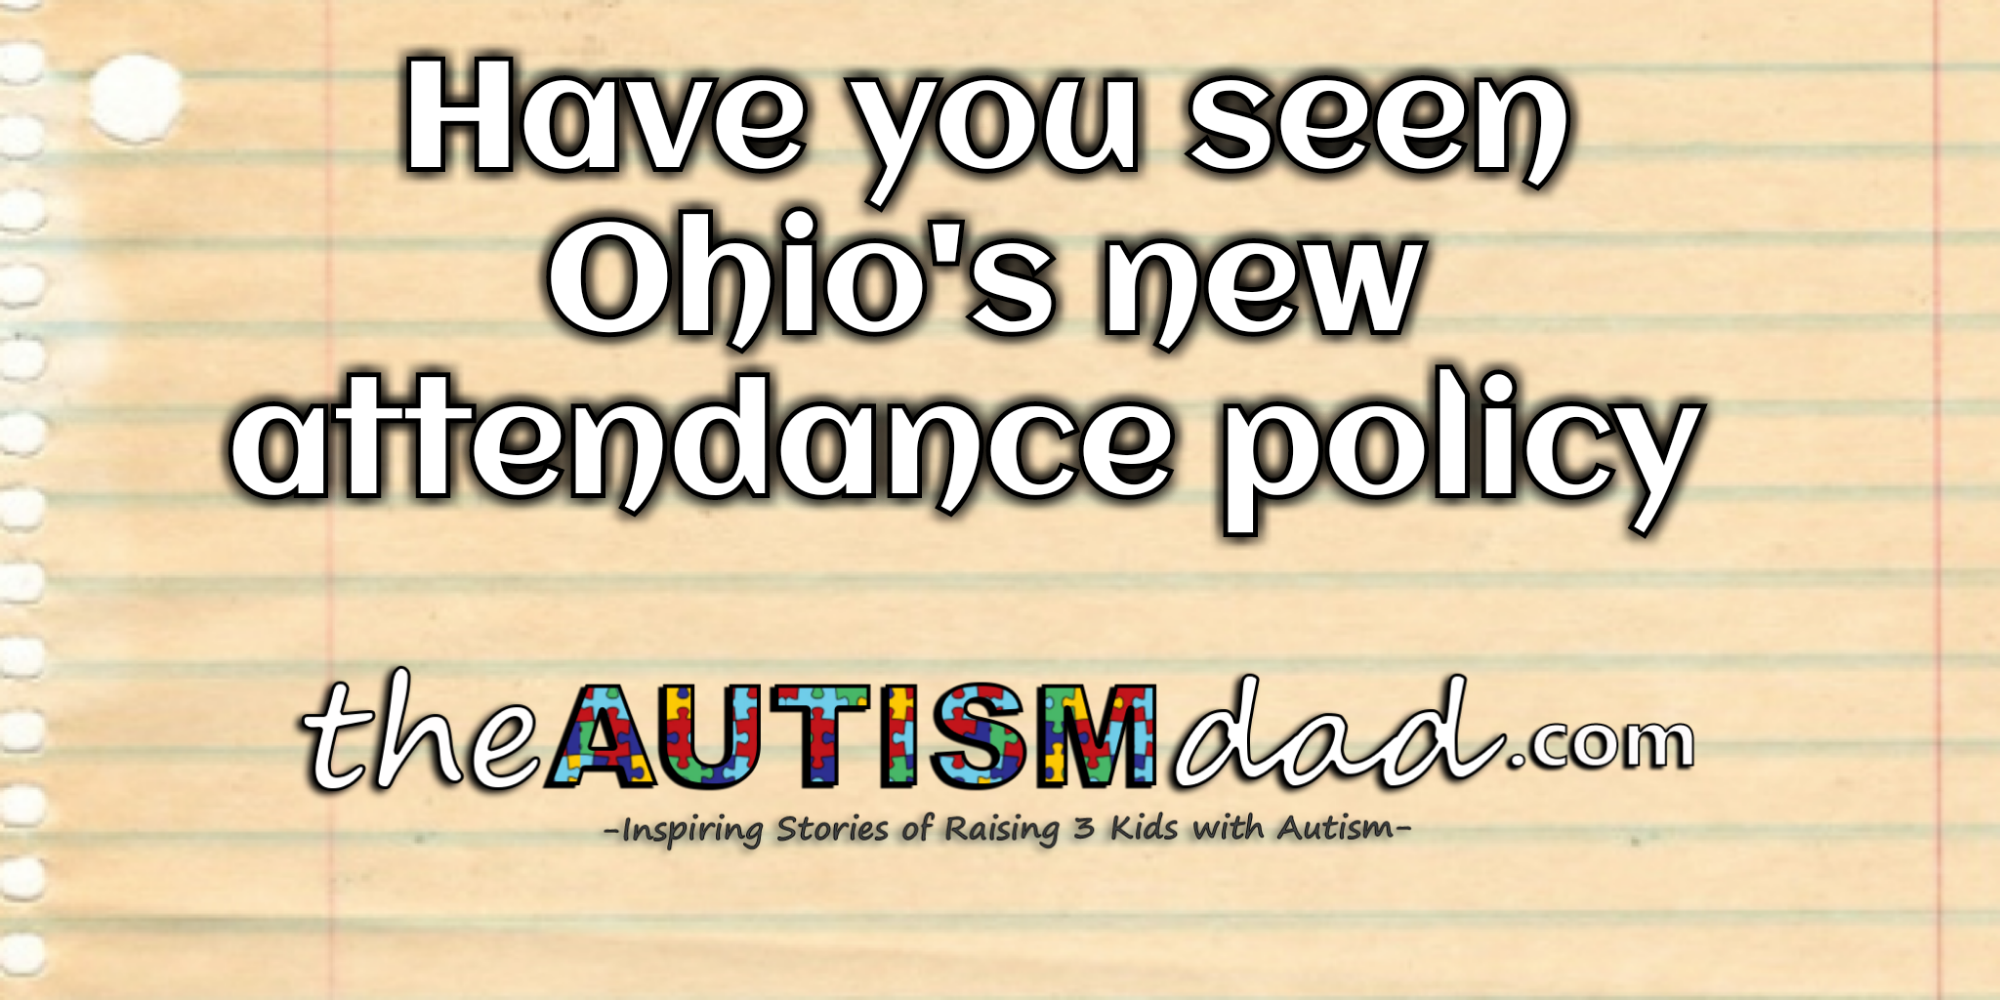 Read more about the article Have you seen Ohio’s new attendance policy? You’d better have a look